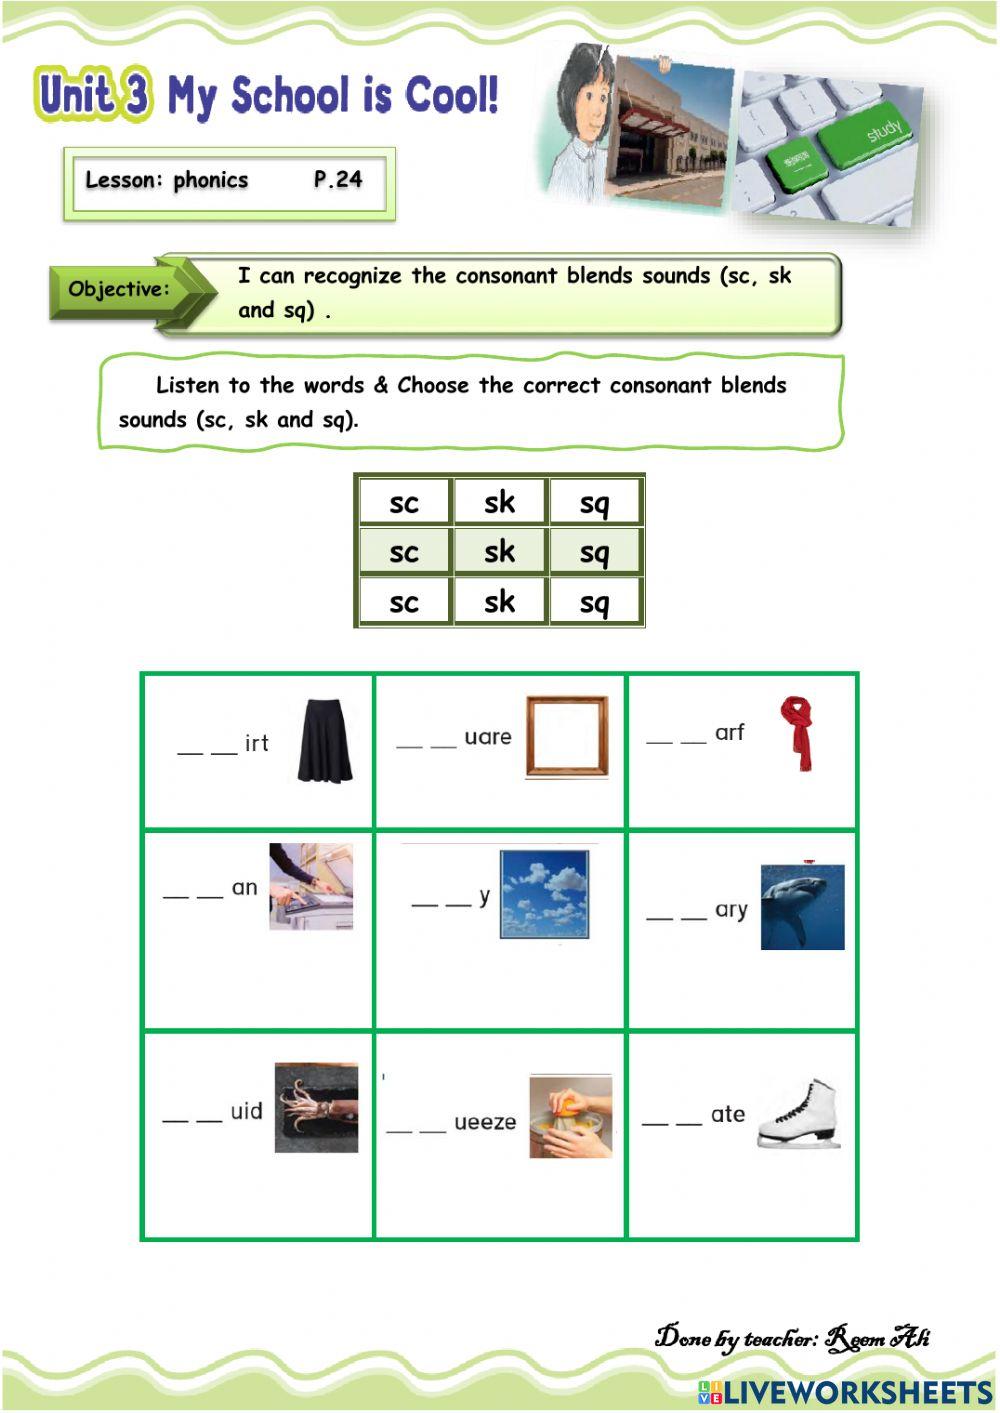 We Can6 U3 L4: I can recognize the consonant blends sounds (sc, sk and sq) .